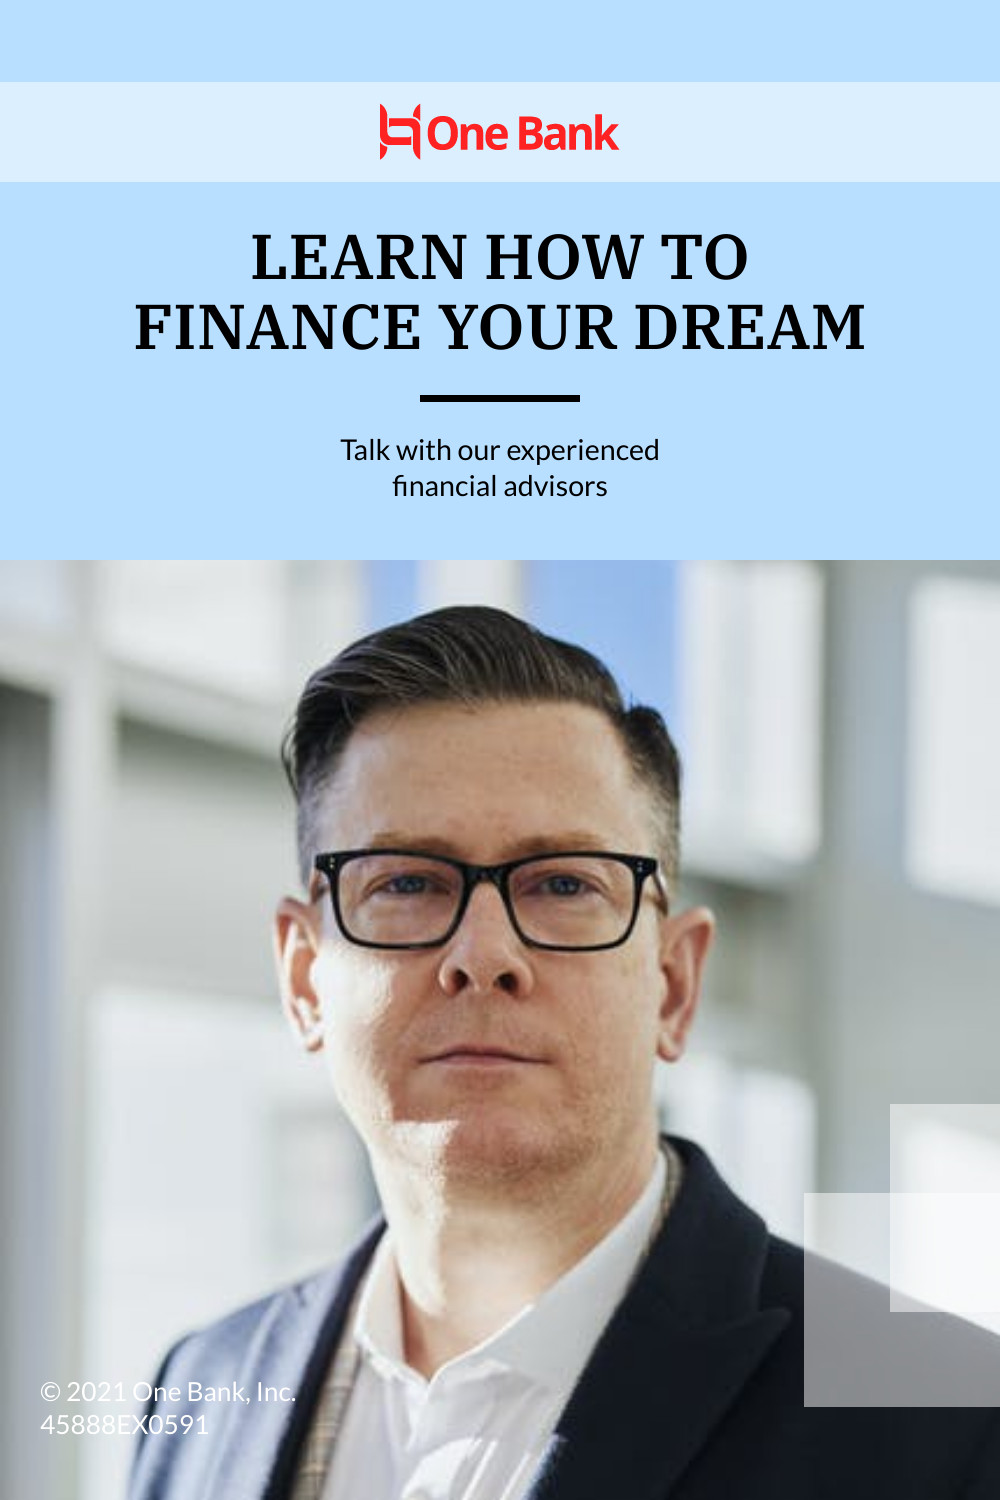 Finance Your Dream Bank Offer